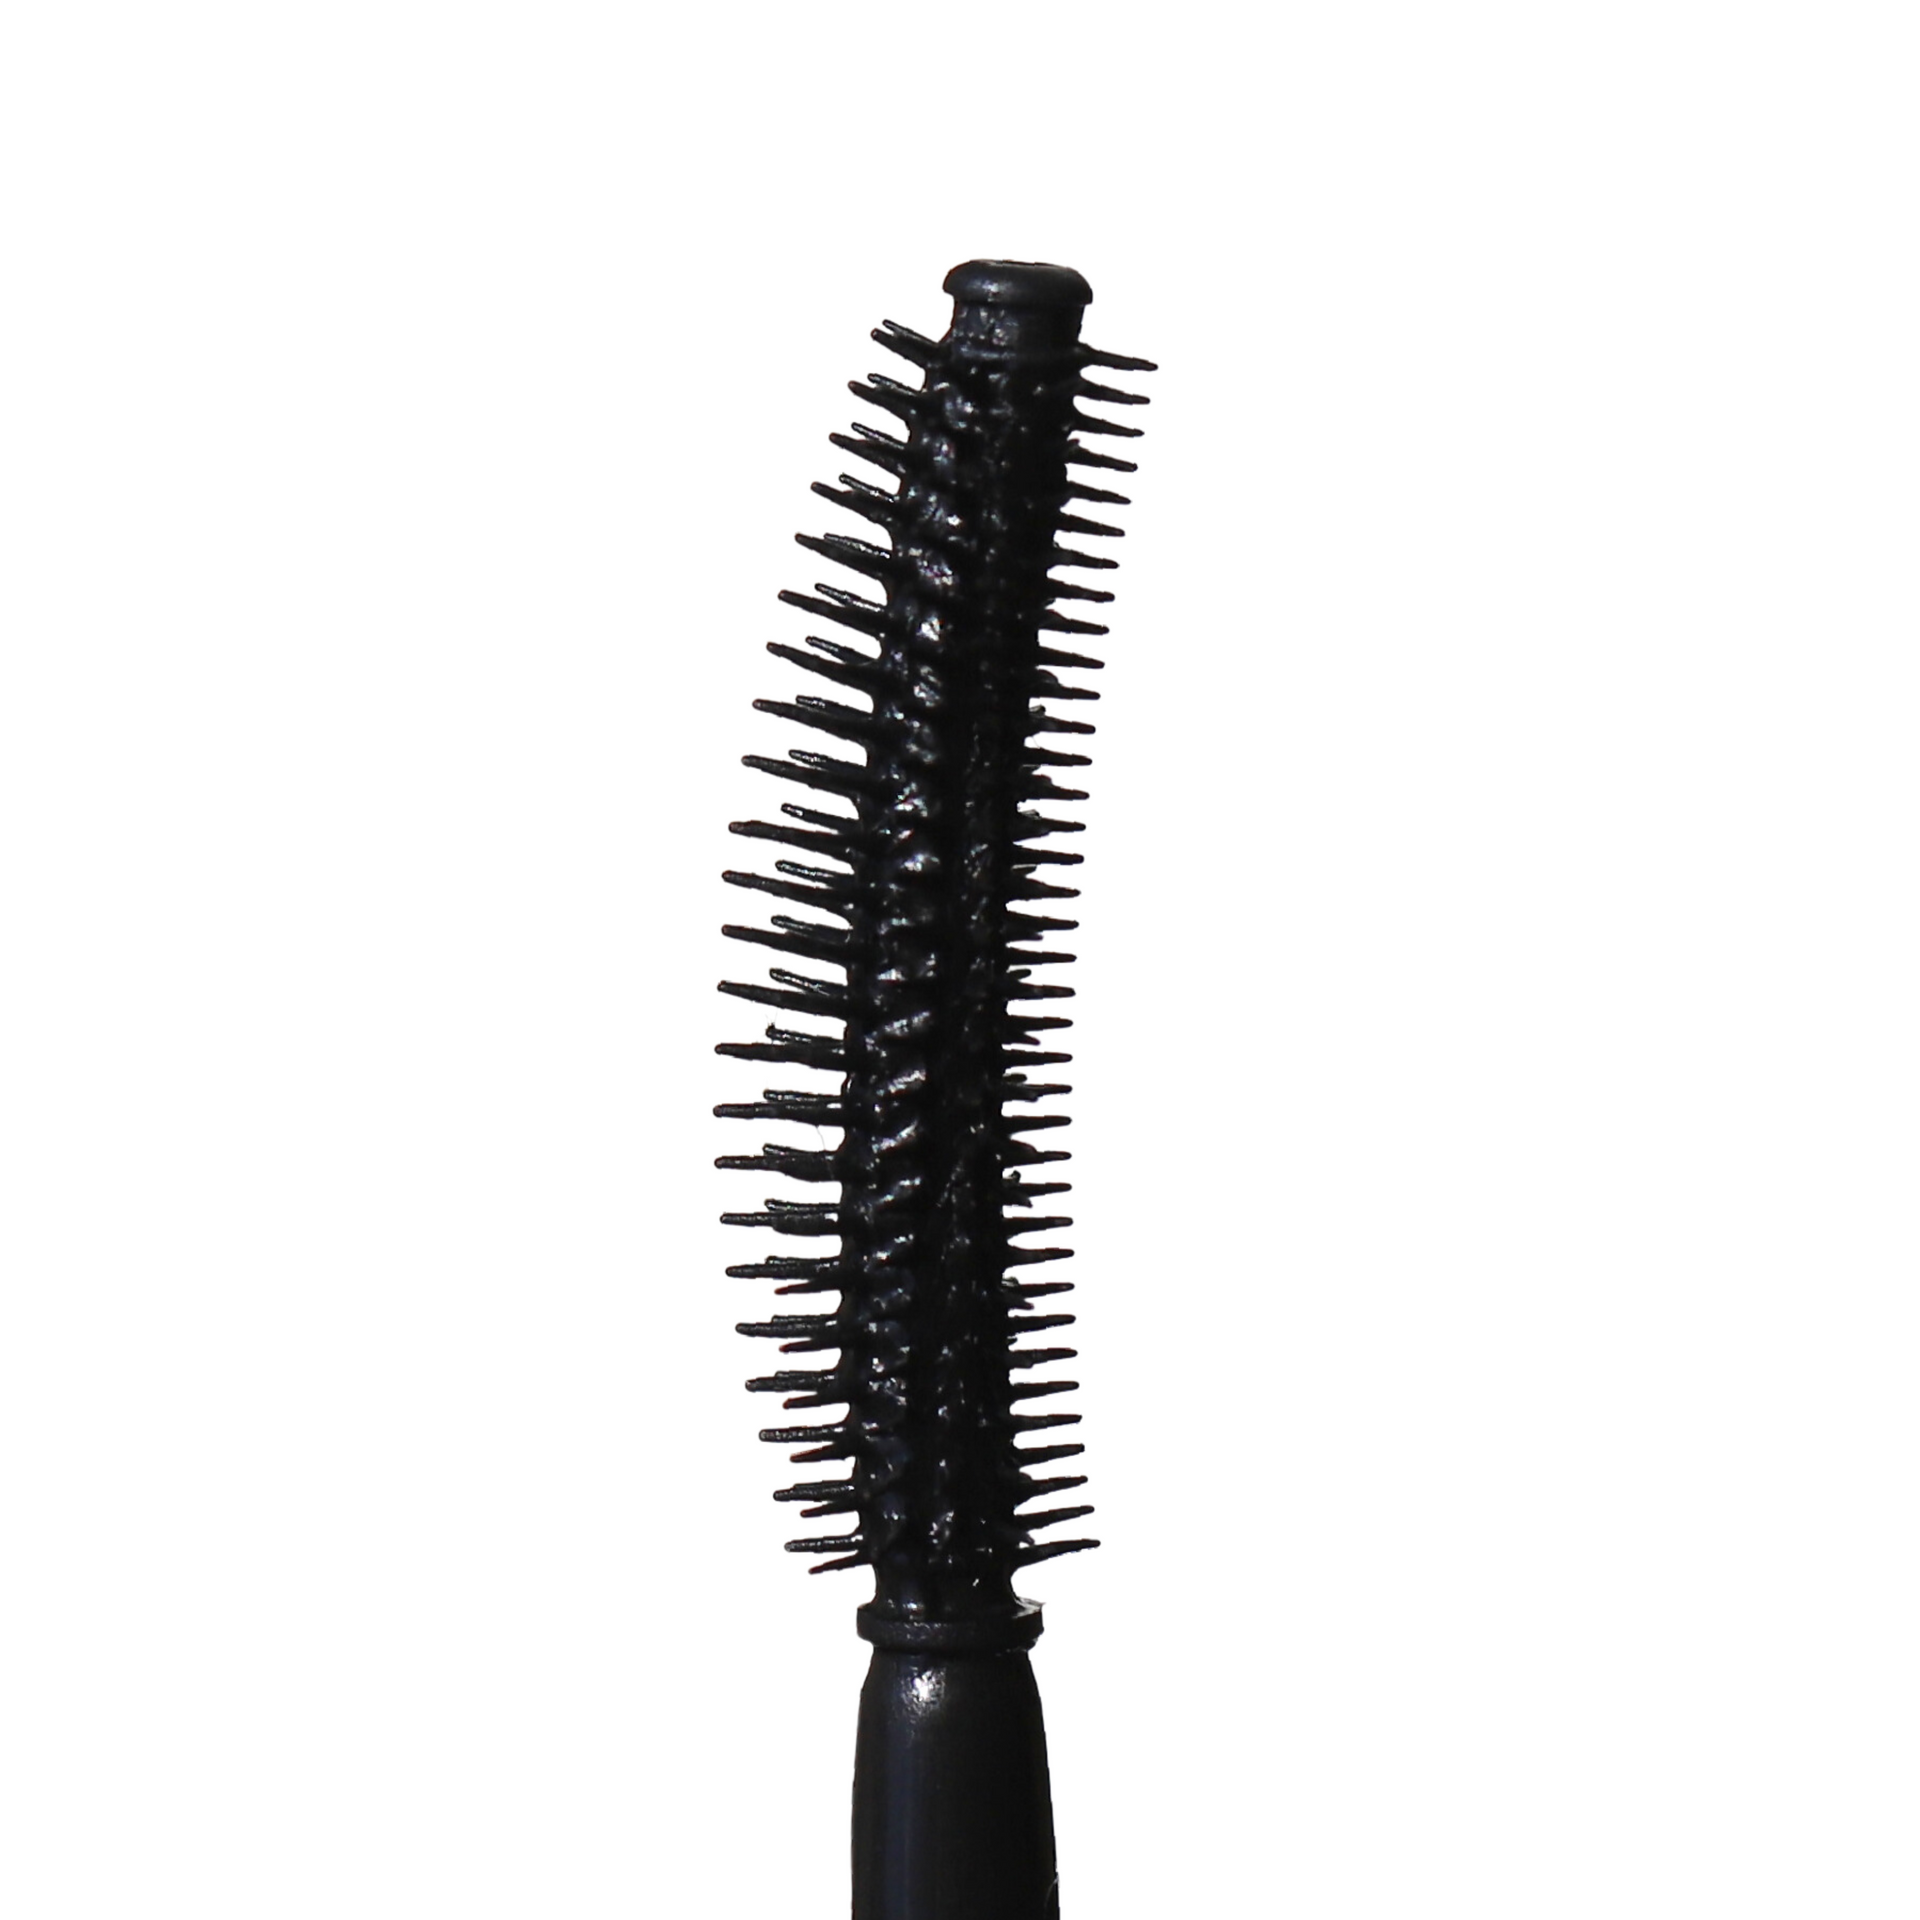 Curved applicator brush for Totally Tubular Tubing Mascara, designed to fit perfectly across the lash line for a lengthened and curled lash look.